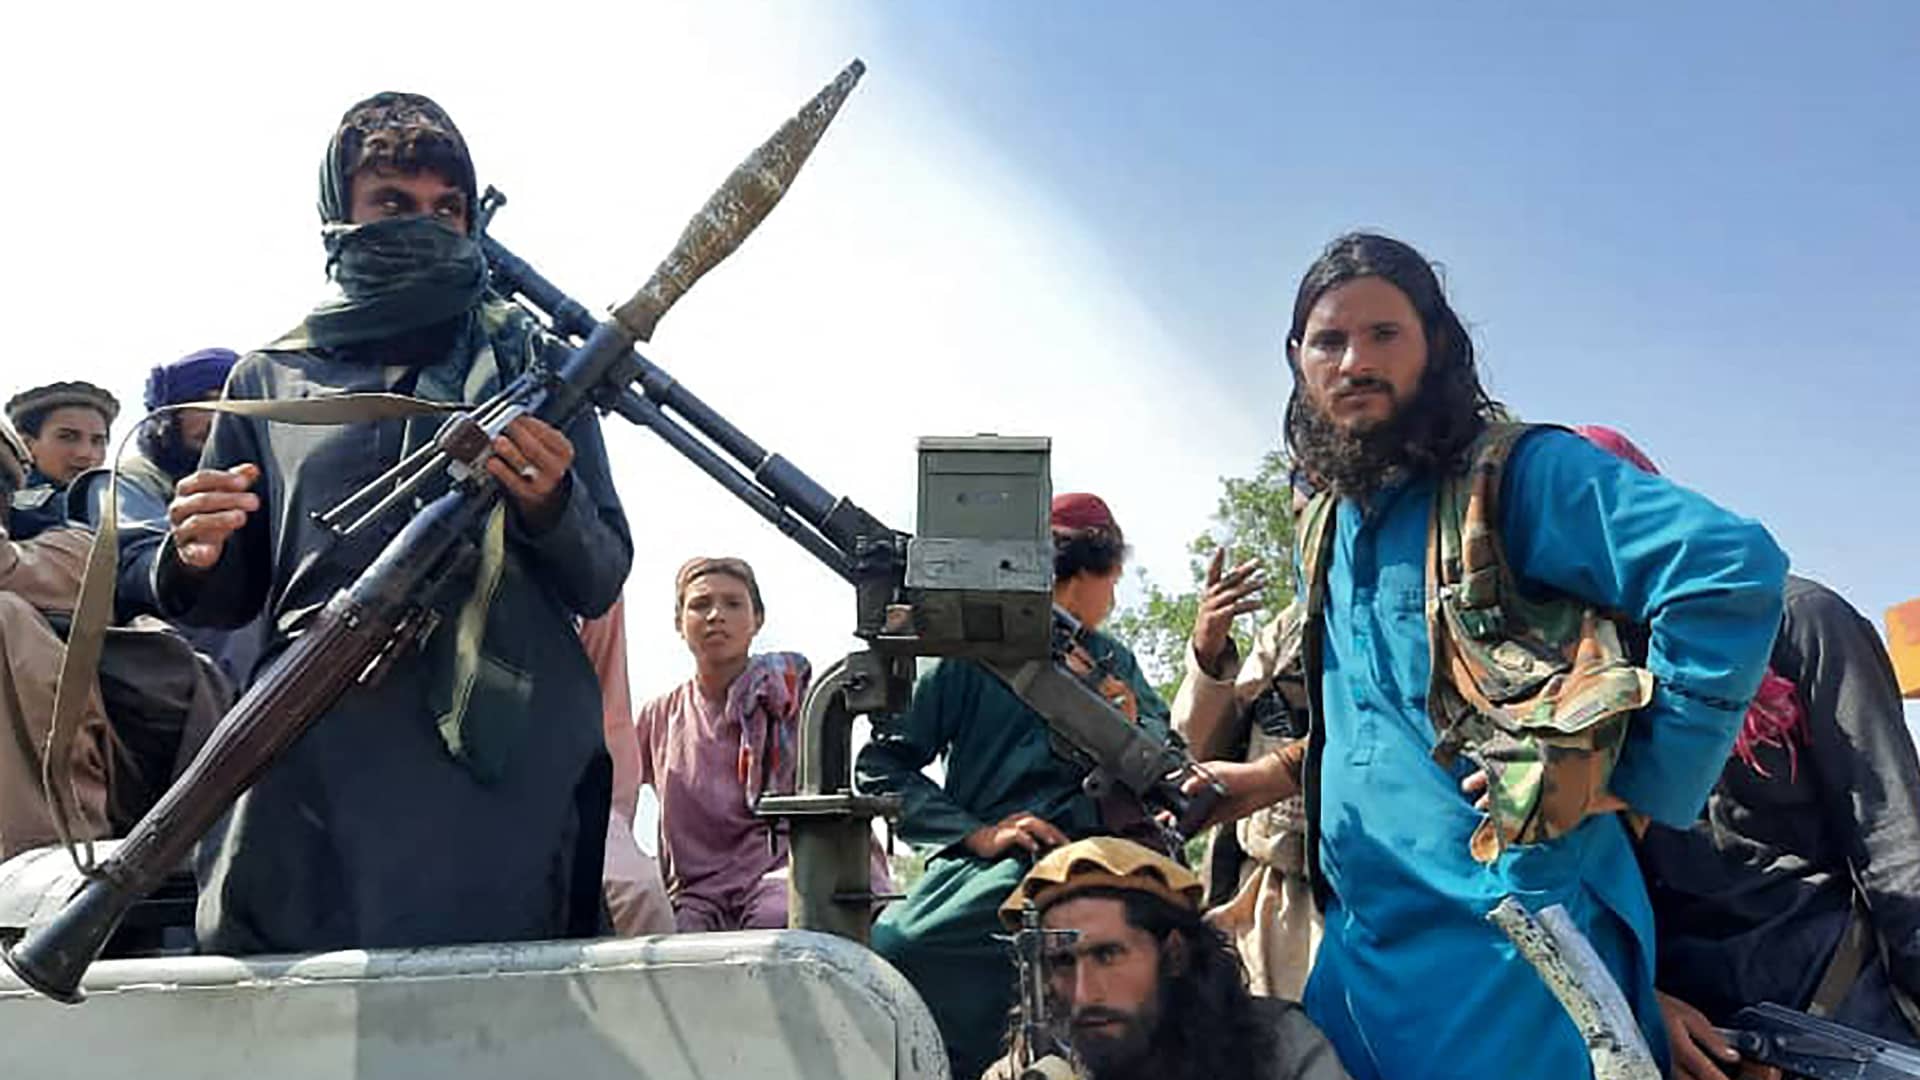 Taliban fighters sit over a vehicle on a street in Laghman province on August 15, 2021.